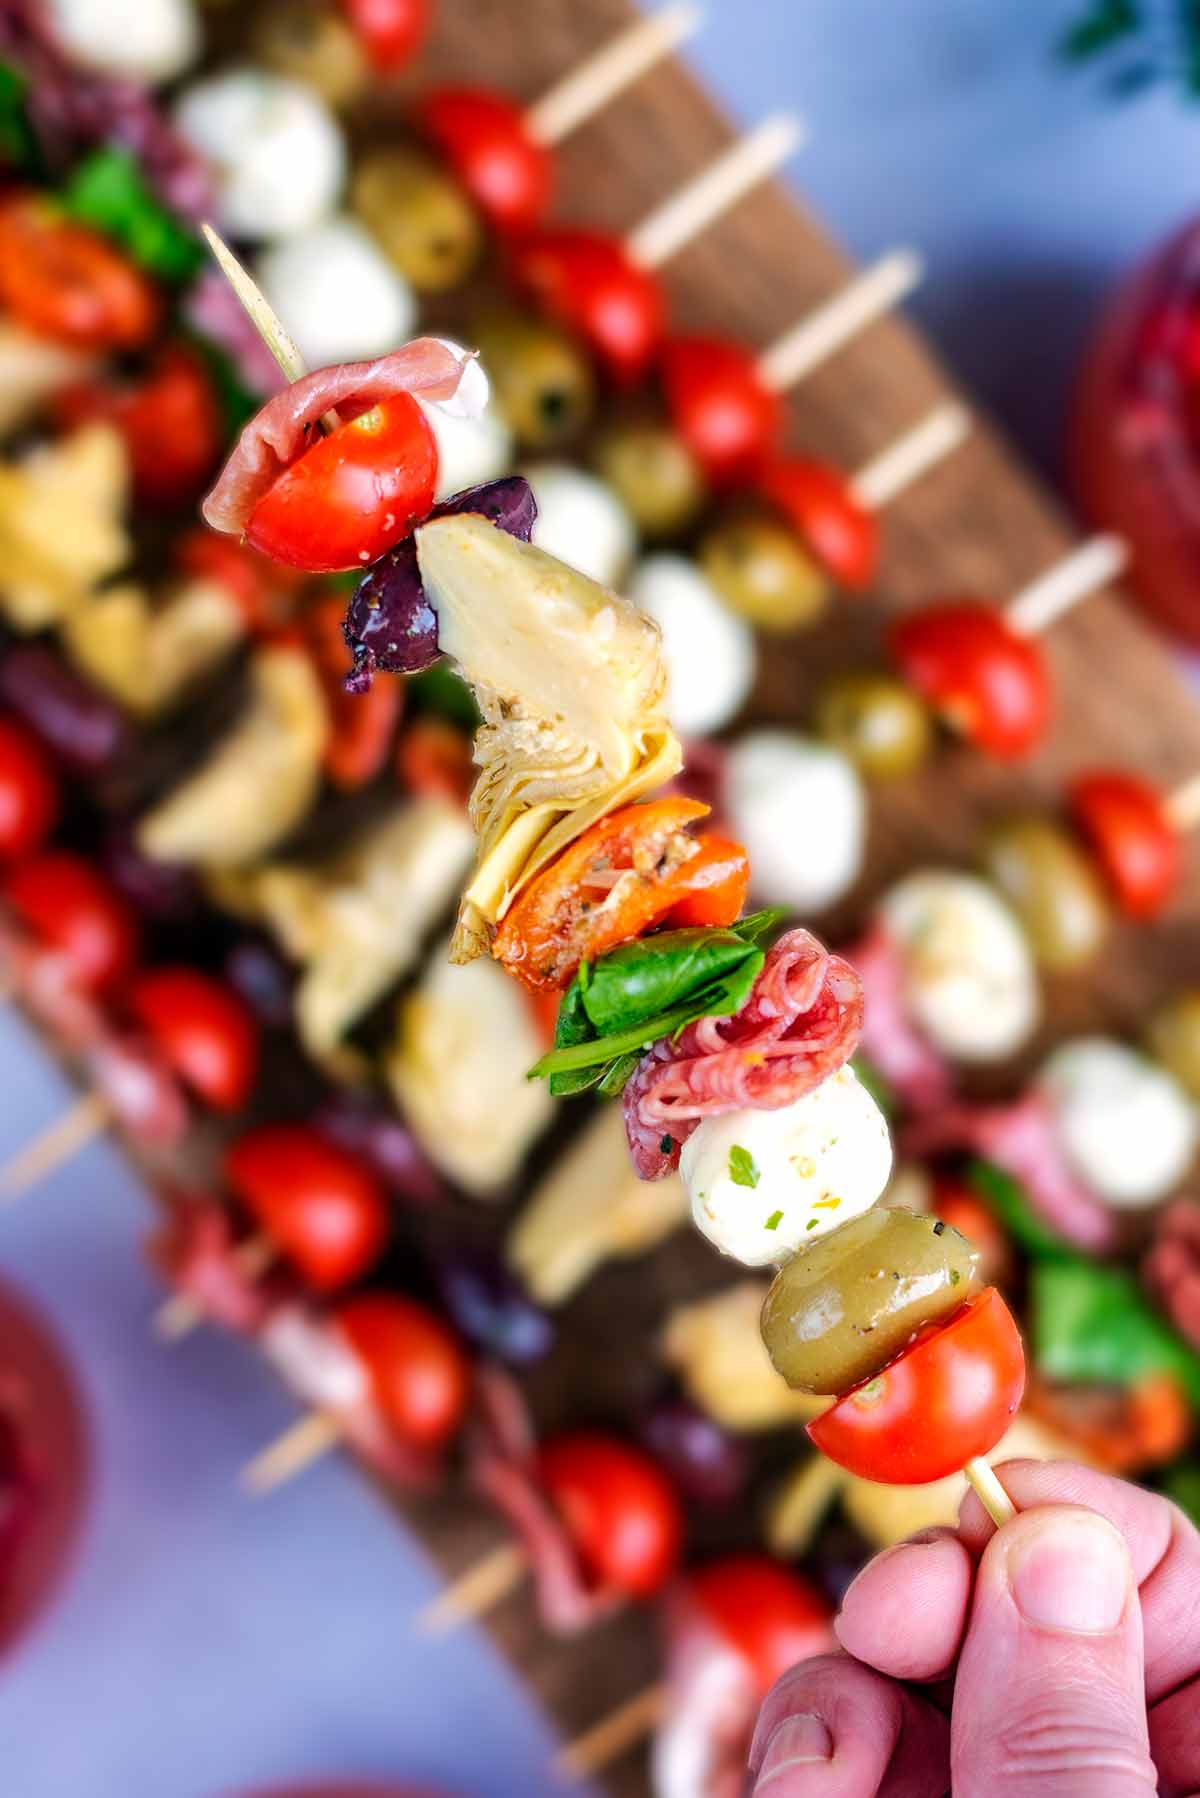 A hand holding an antipasto skewer over a board of more skewers.